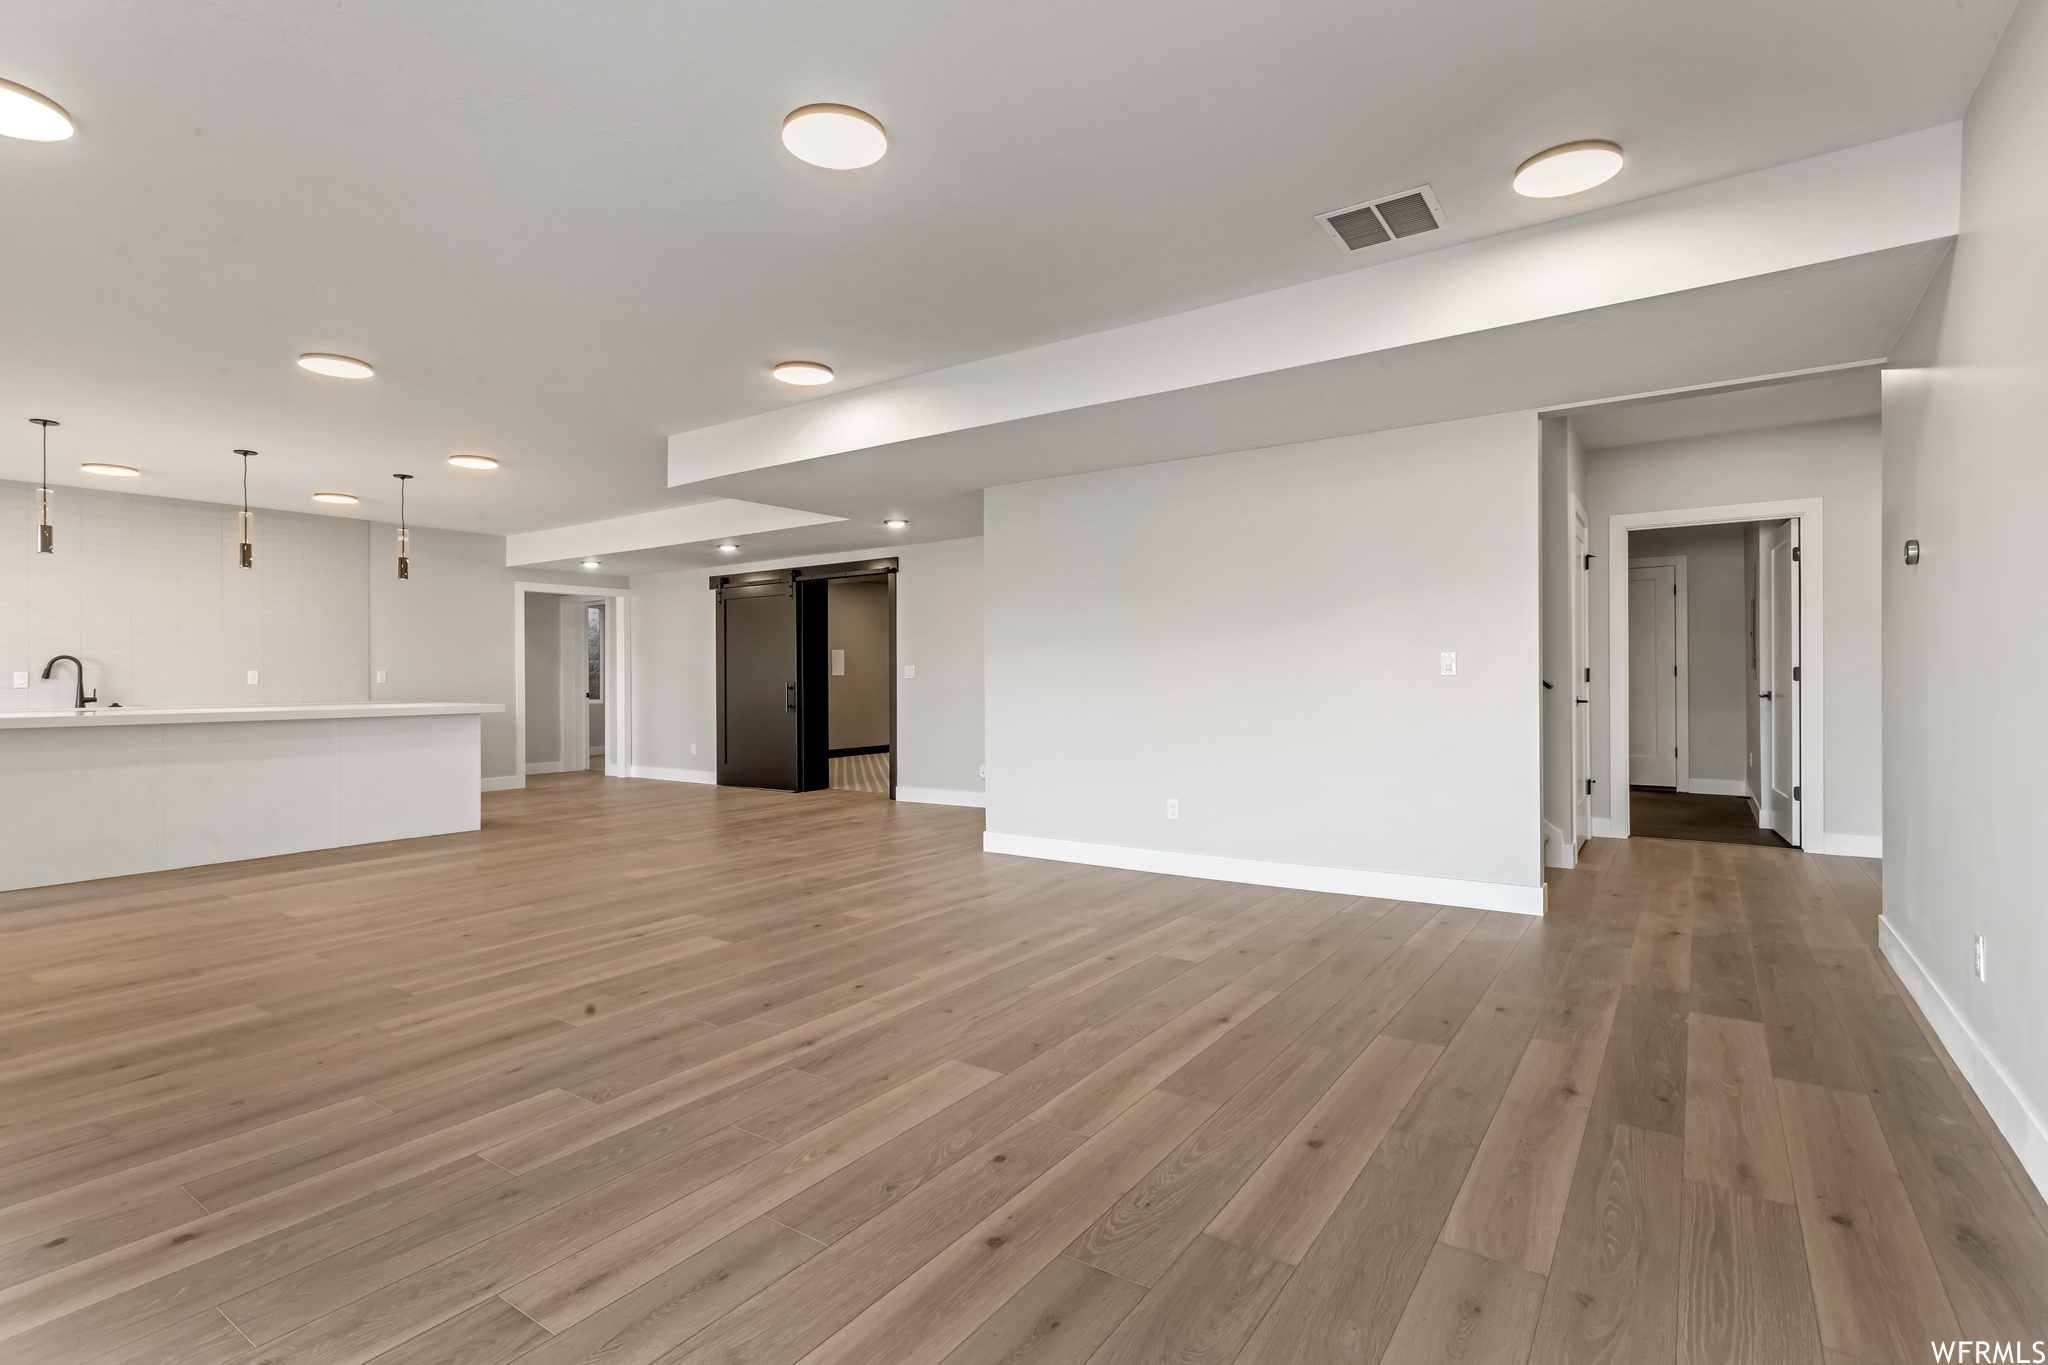 Expansive family room space with high quality LVP flooring